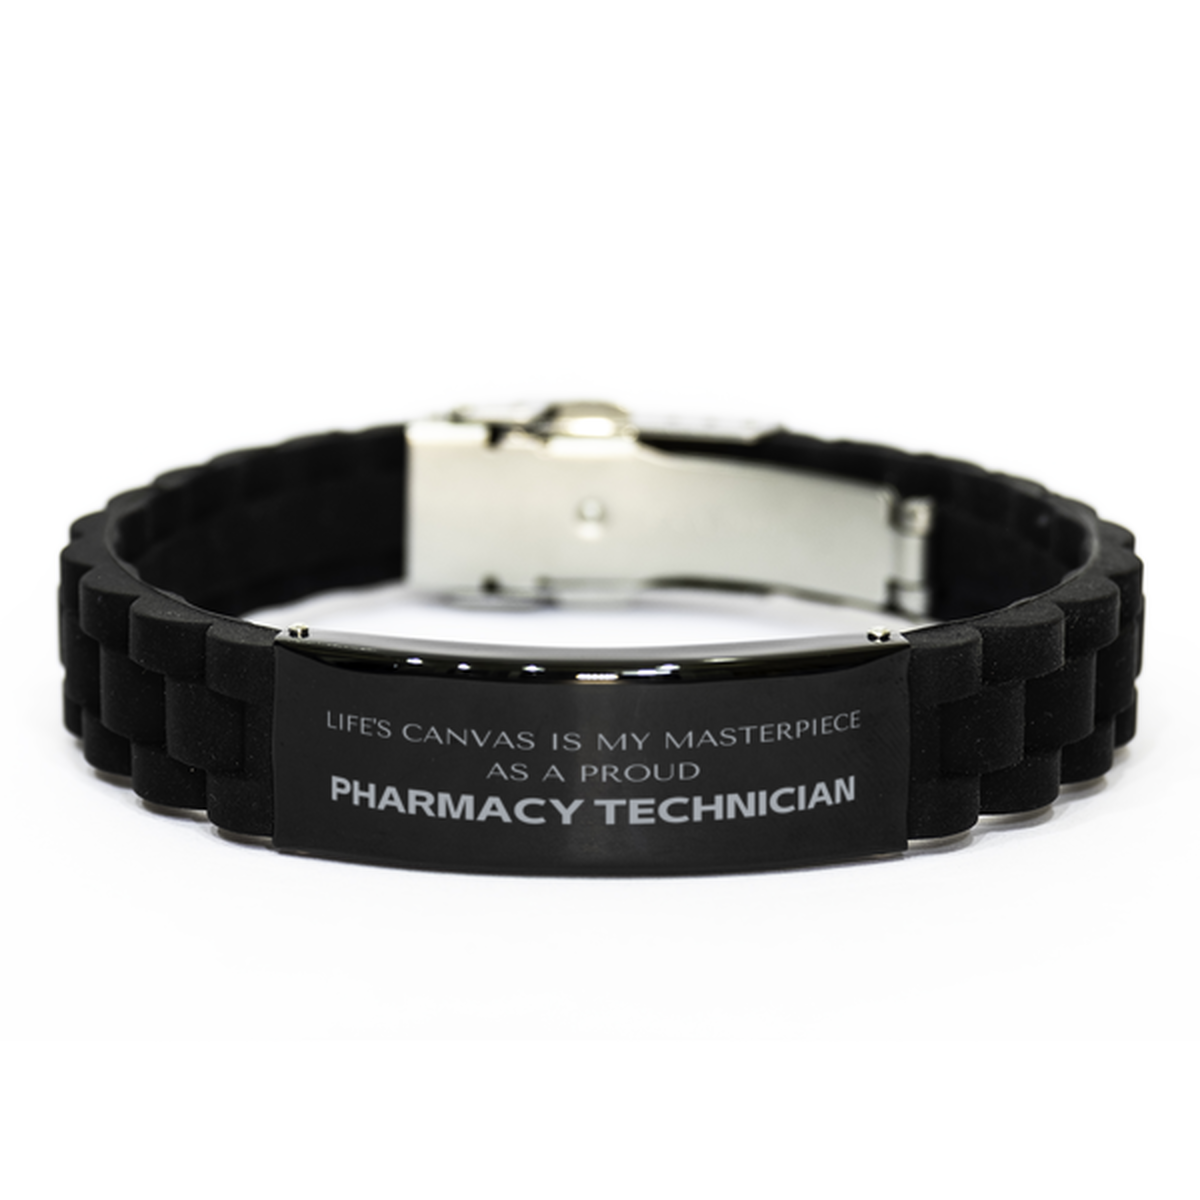 Proud Pharmacy Technician Gifts, Life's canvas is my masterpiece, Epic Birthday Christmas Unique Black Glidelock Clasp Bracelet For Pharmacy Technician, Coworkers, Men, Women, Friends